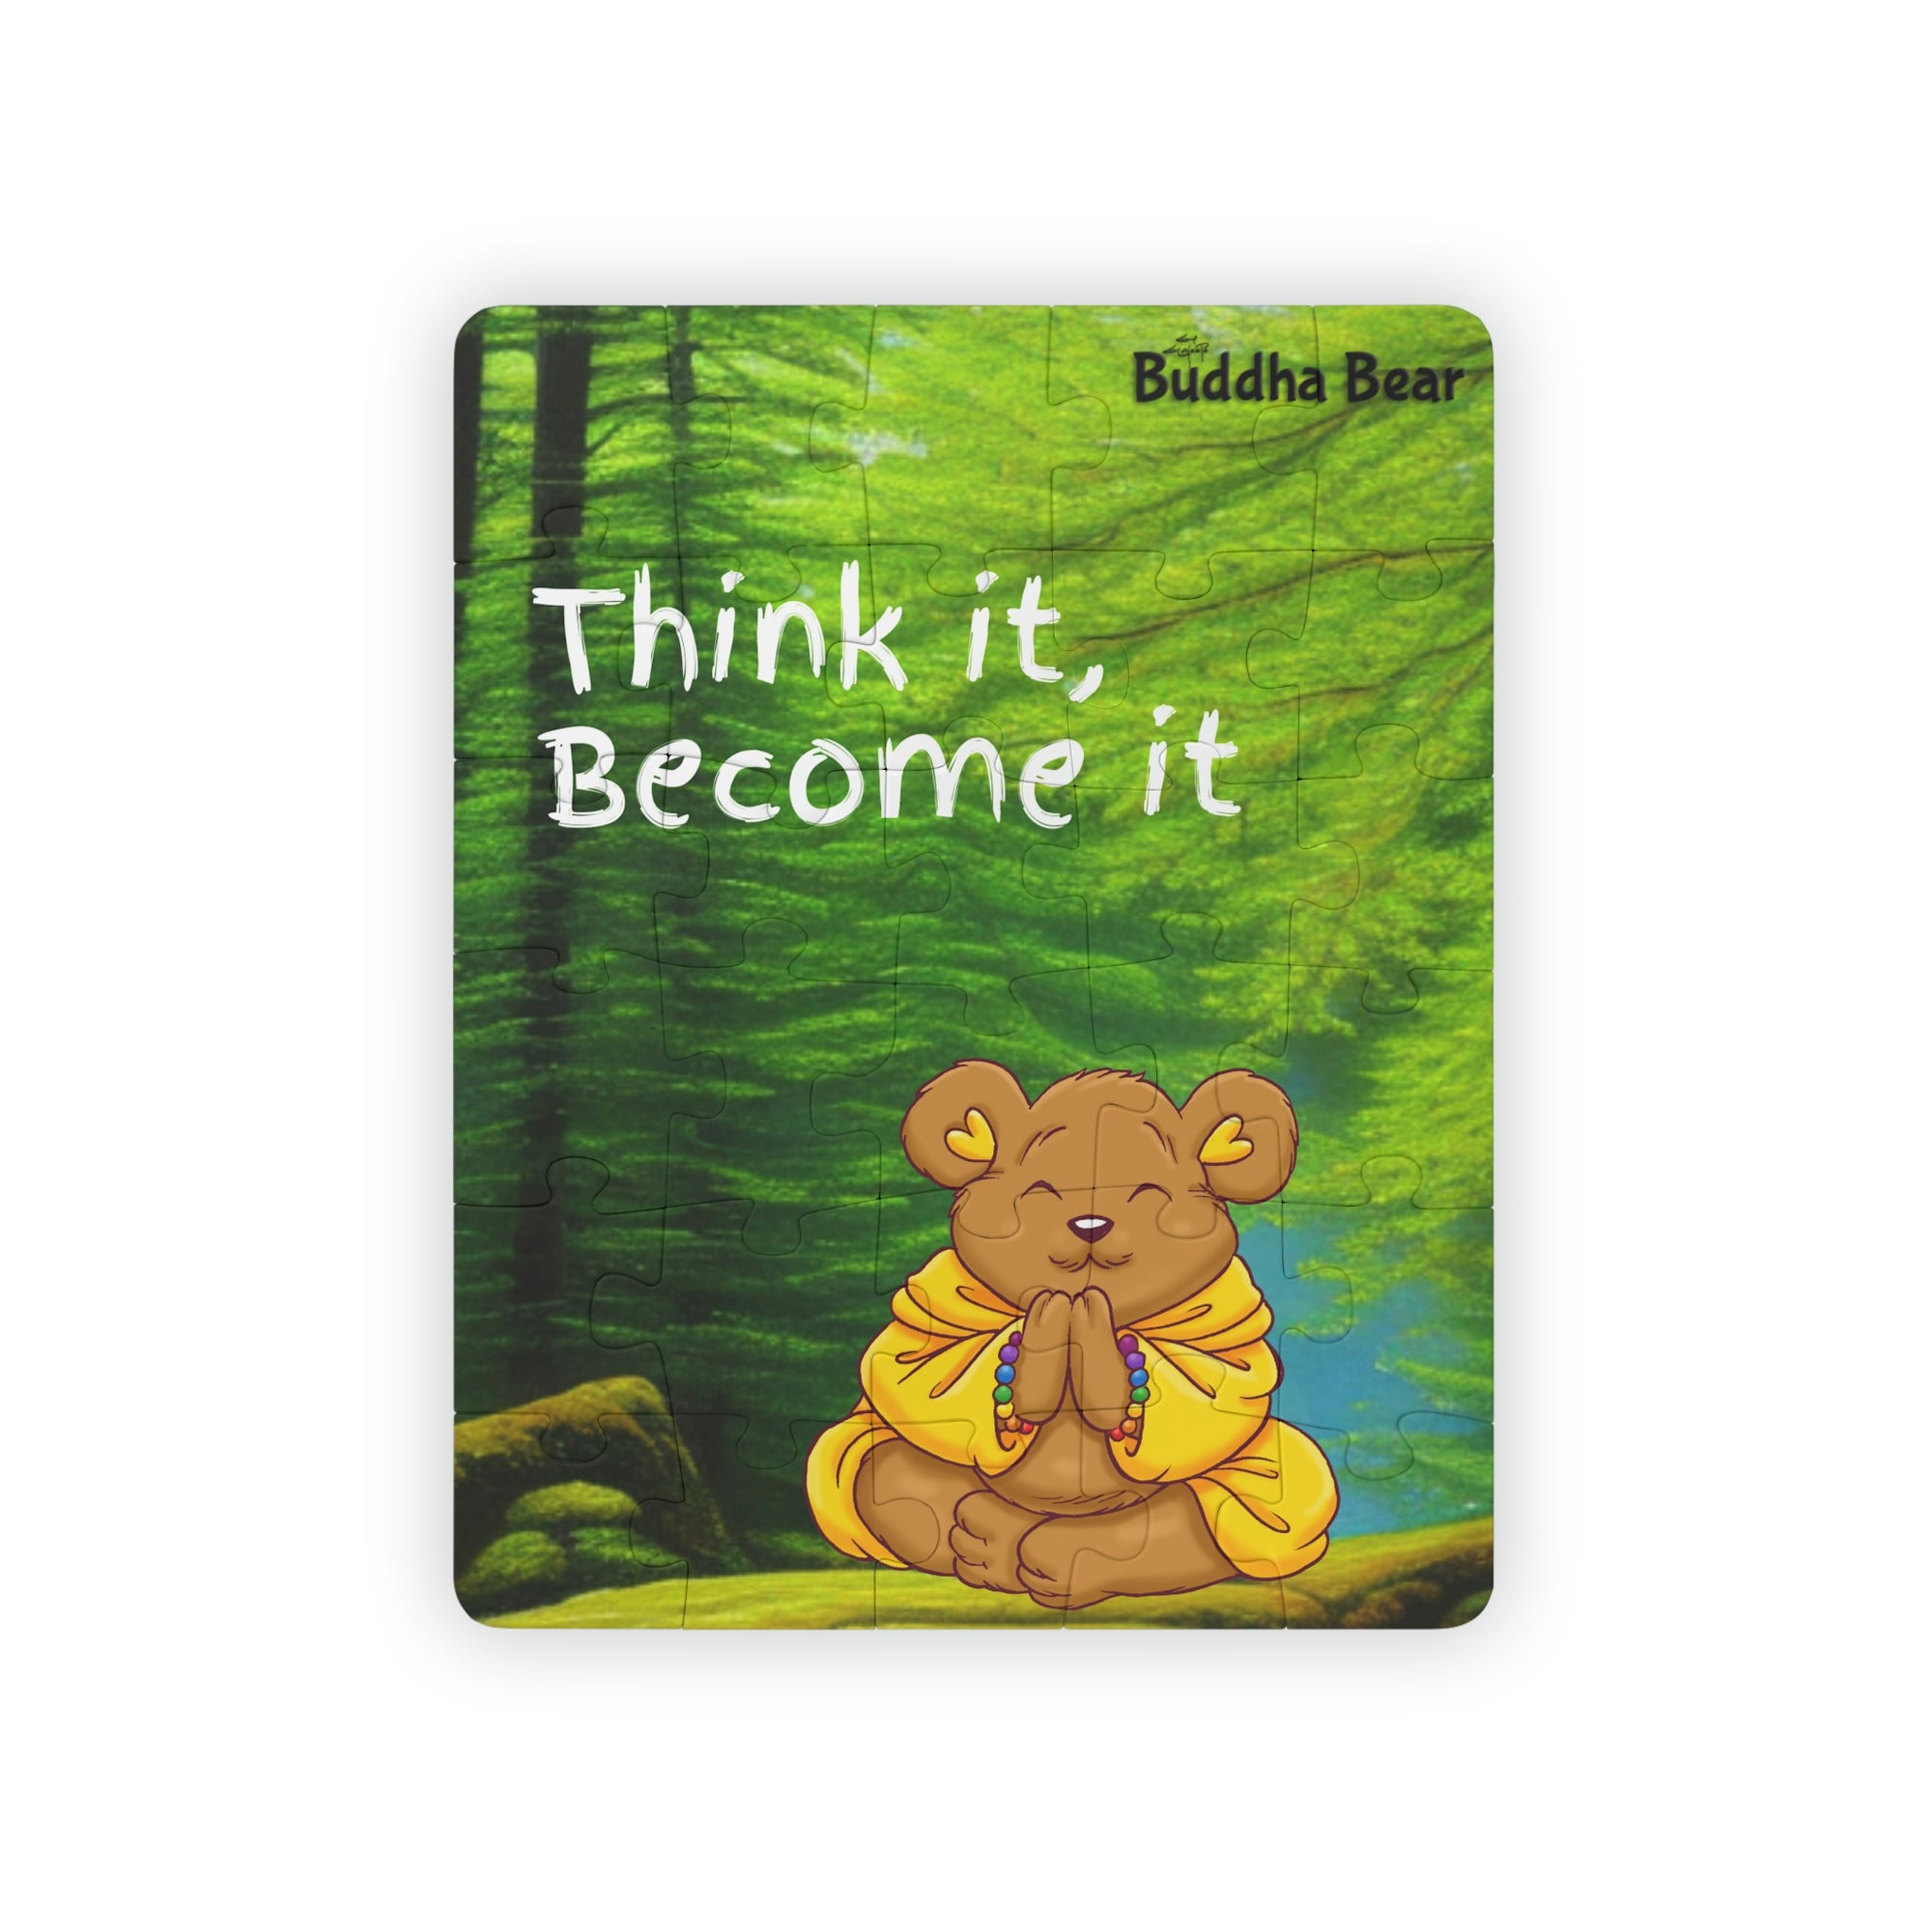 Buddha Bear's "Think it, Become it" Puzzle